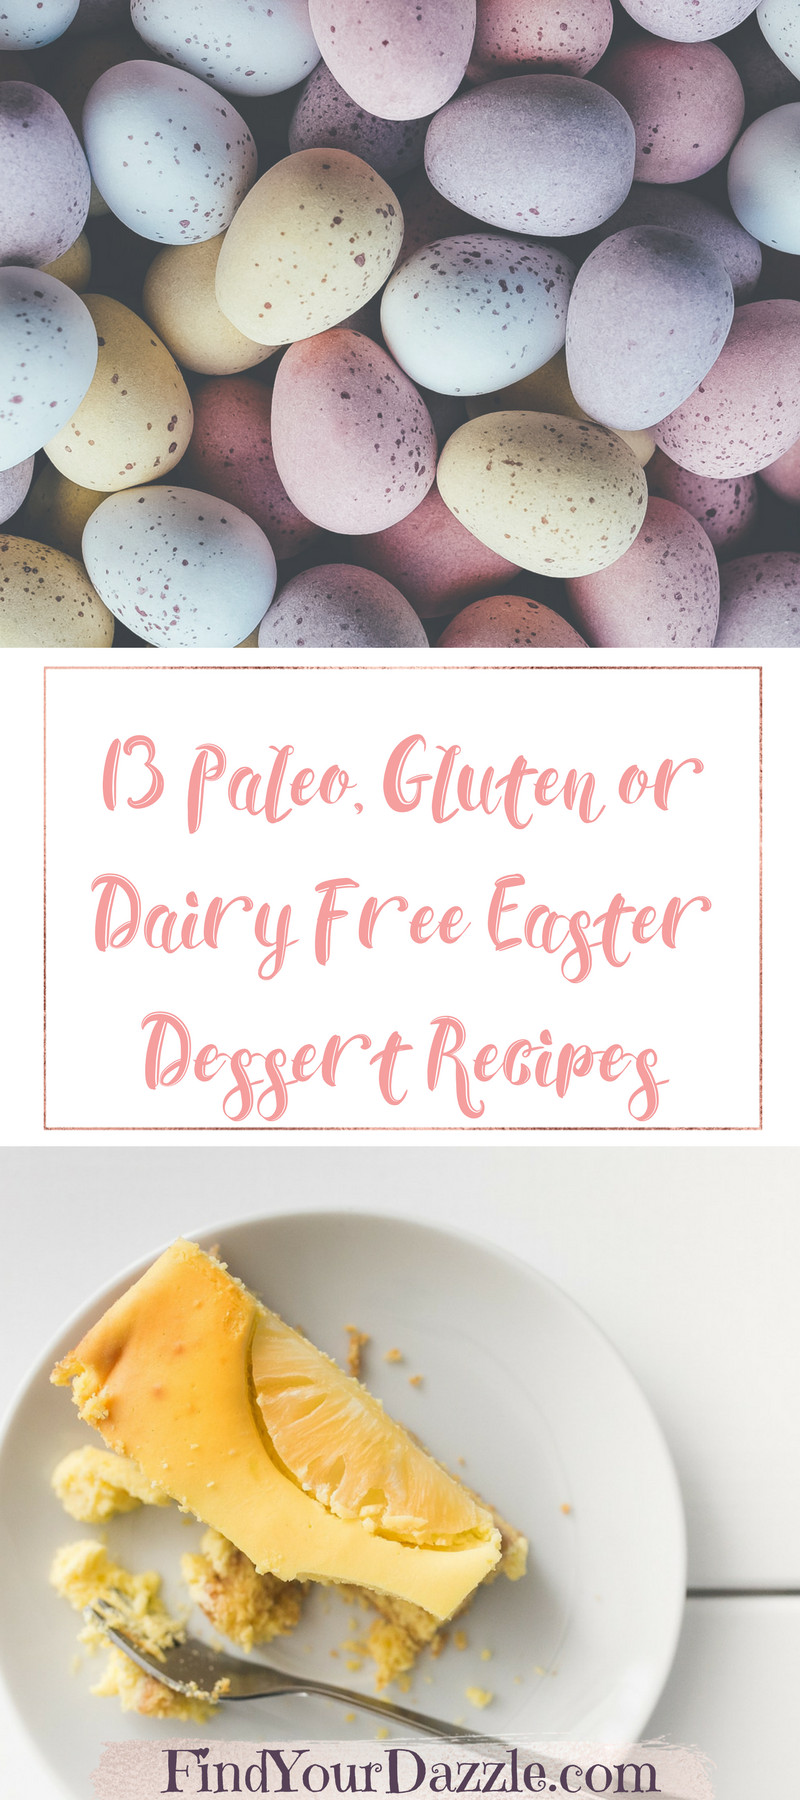 Dairy Free Desserts To Buy
 13 Paleo Gluten or Dairy Free Easter Dessert Recipes